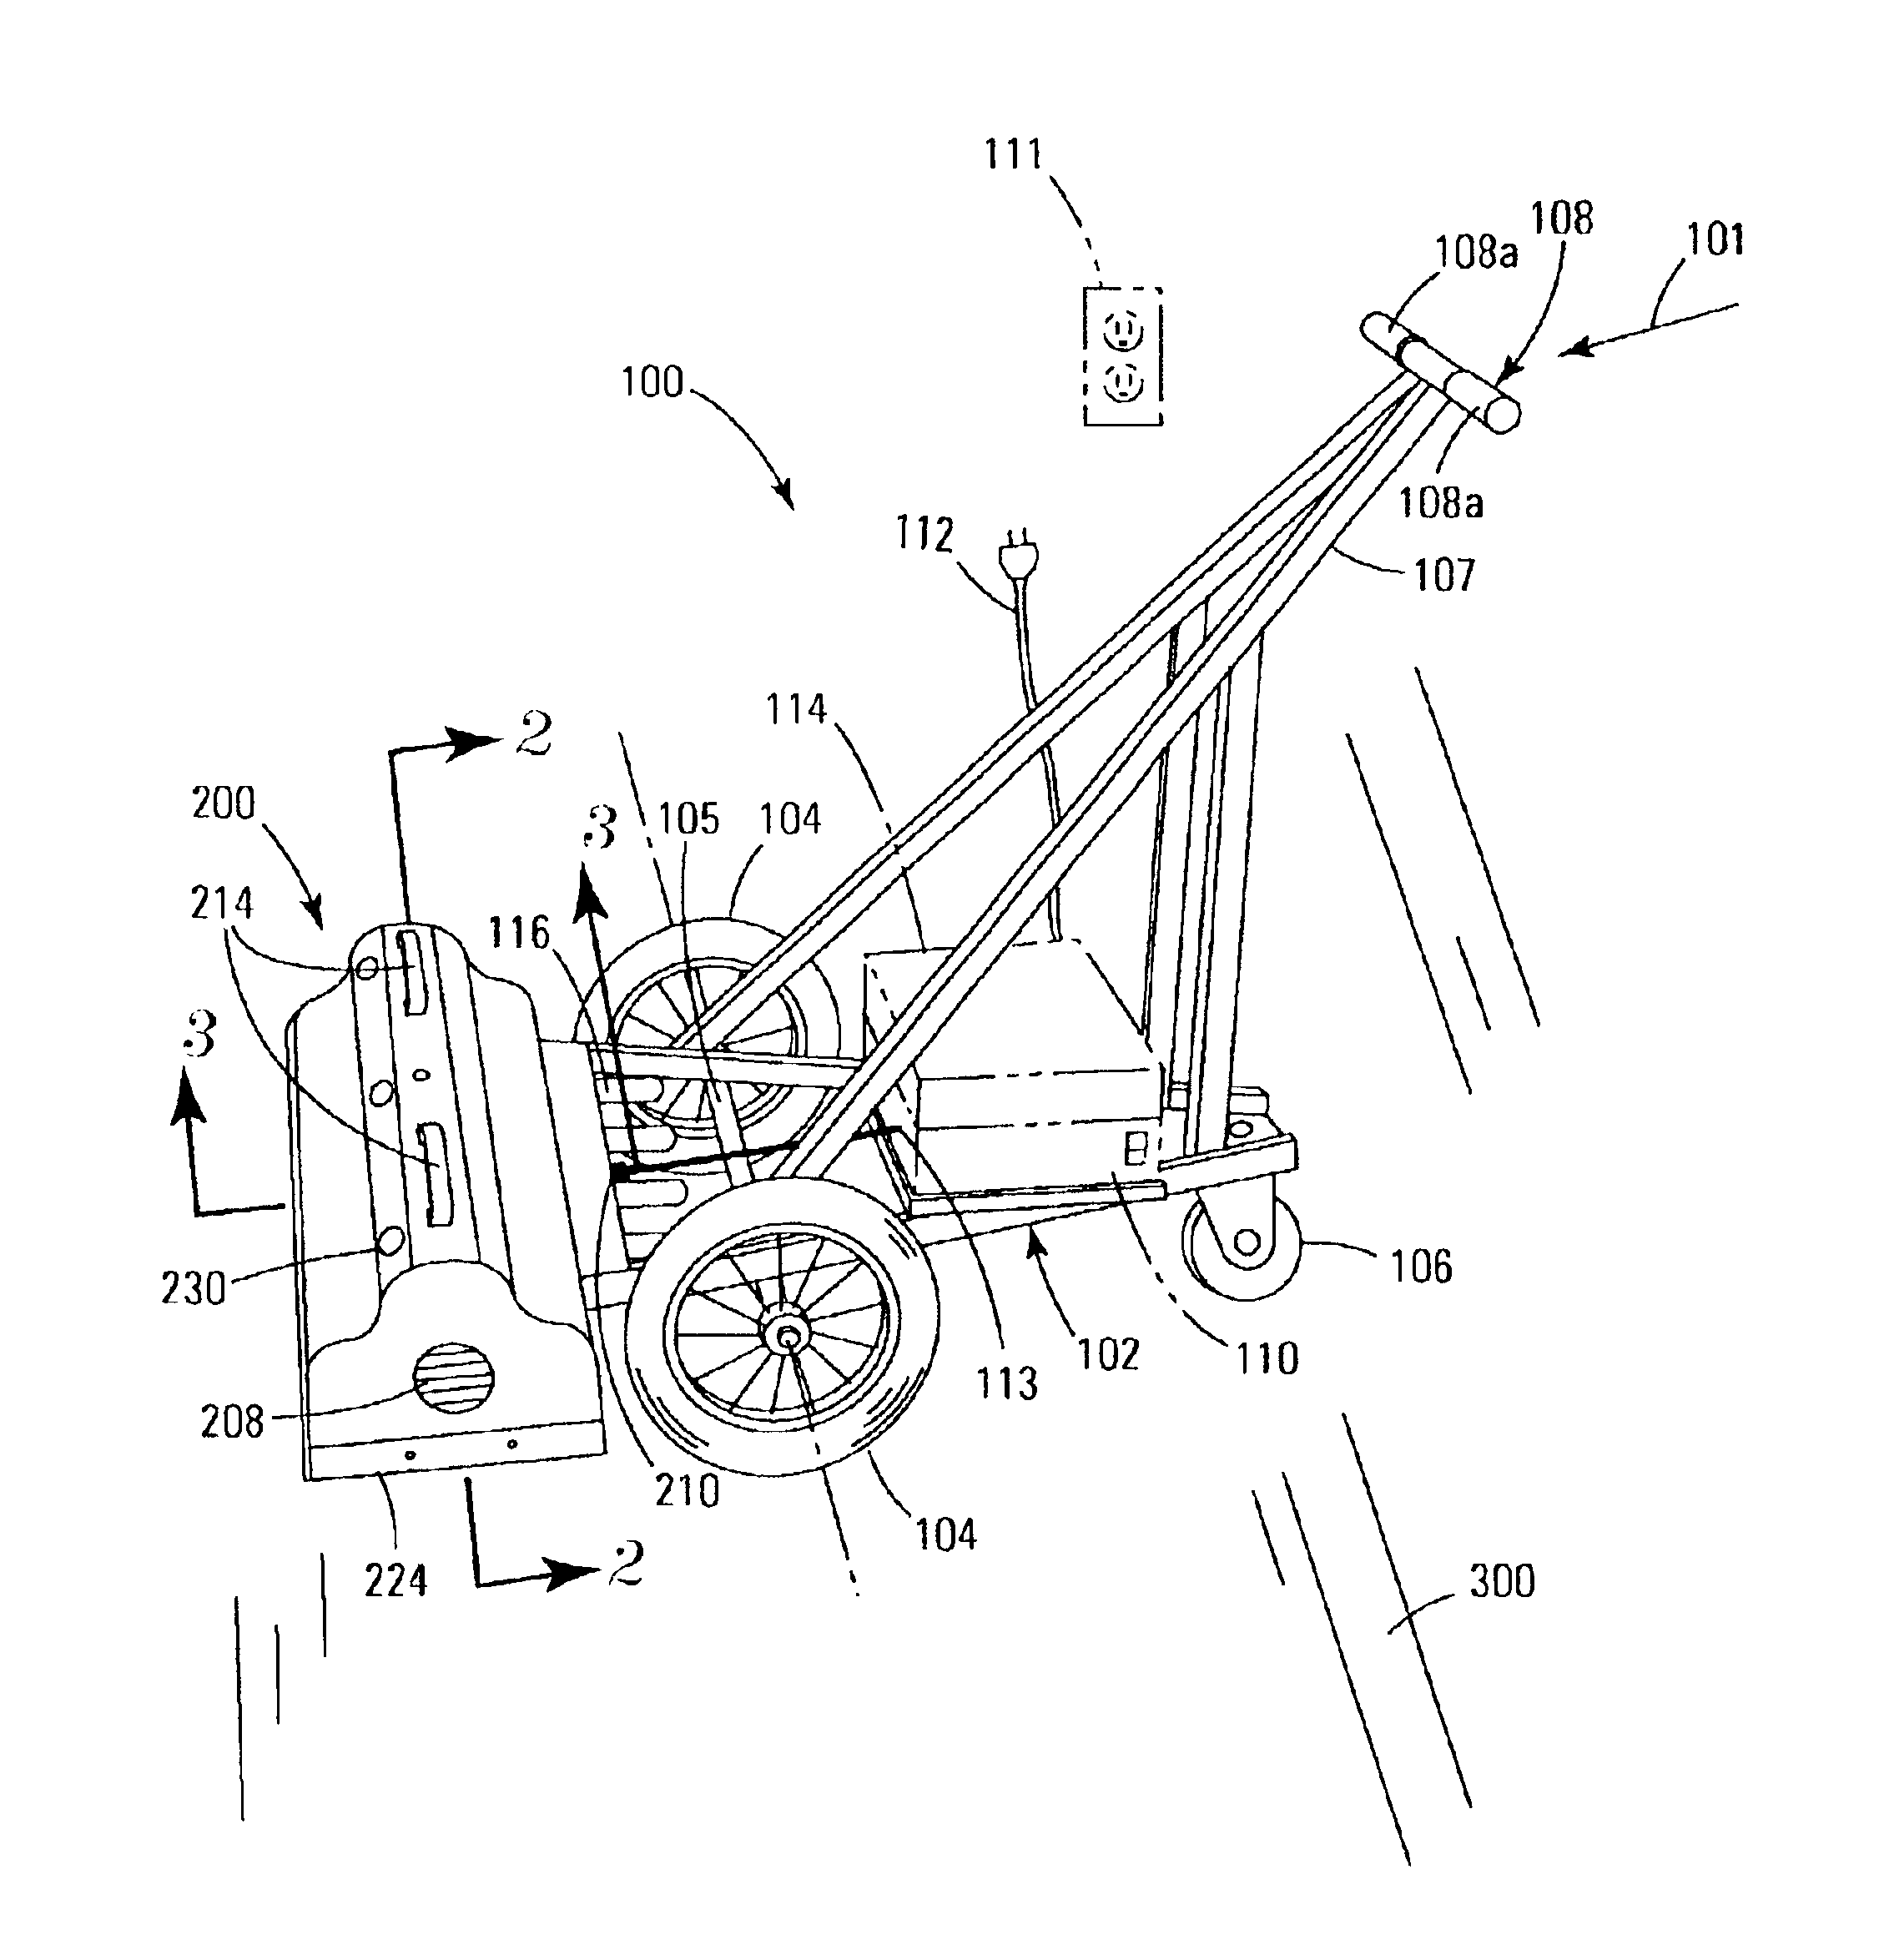 Apparatus for curing floor coatings using ultraviolet radiation